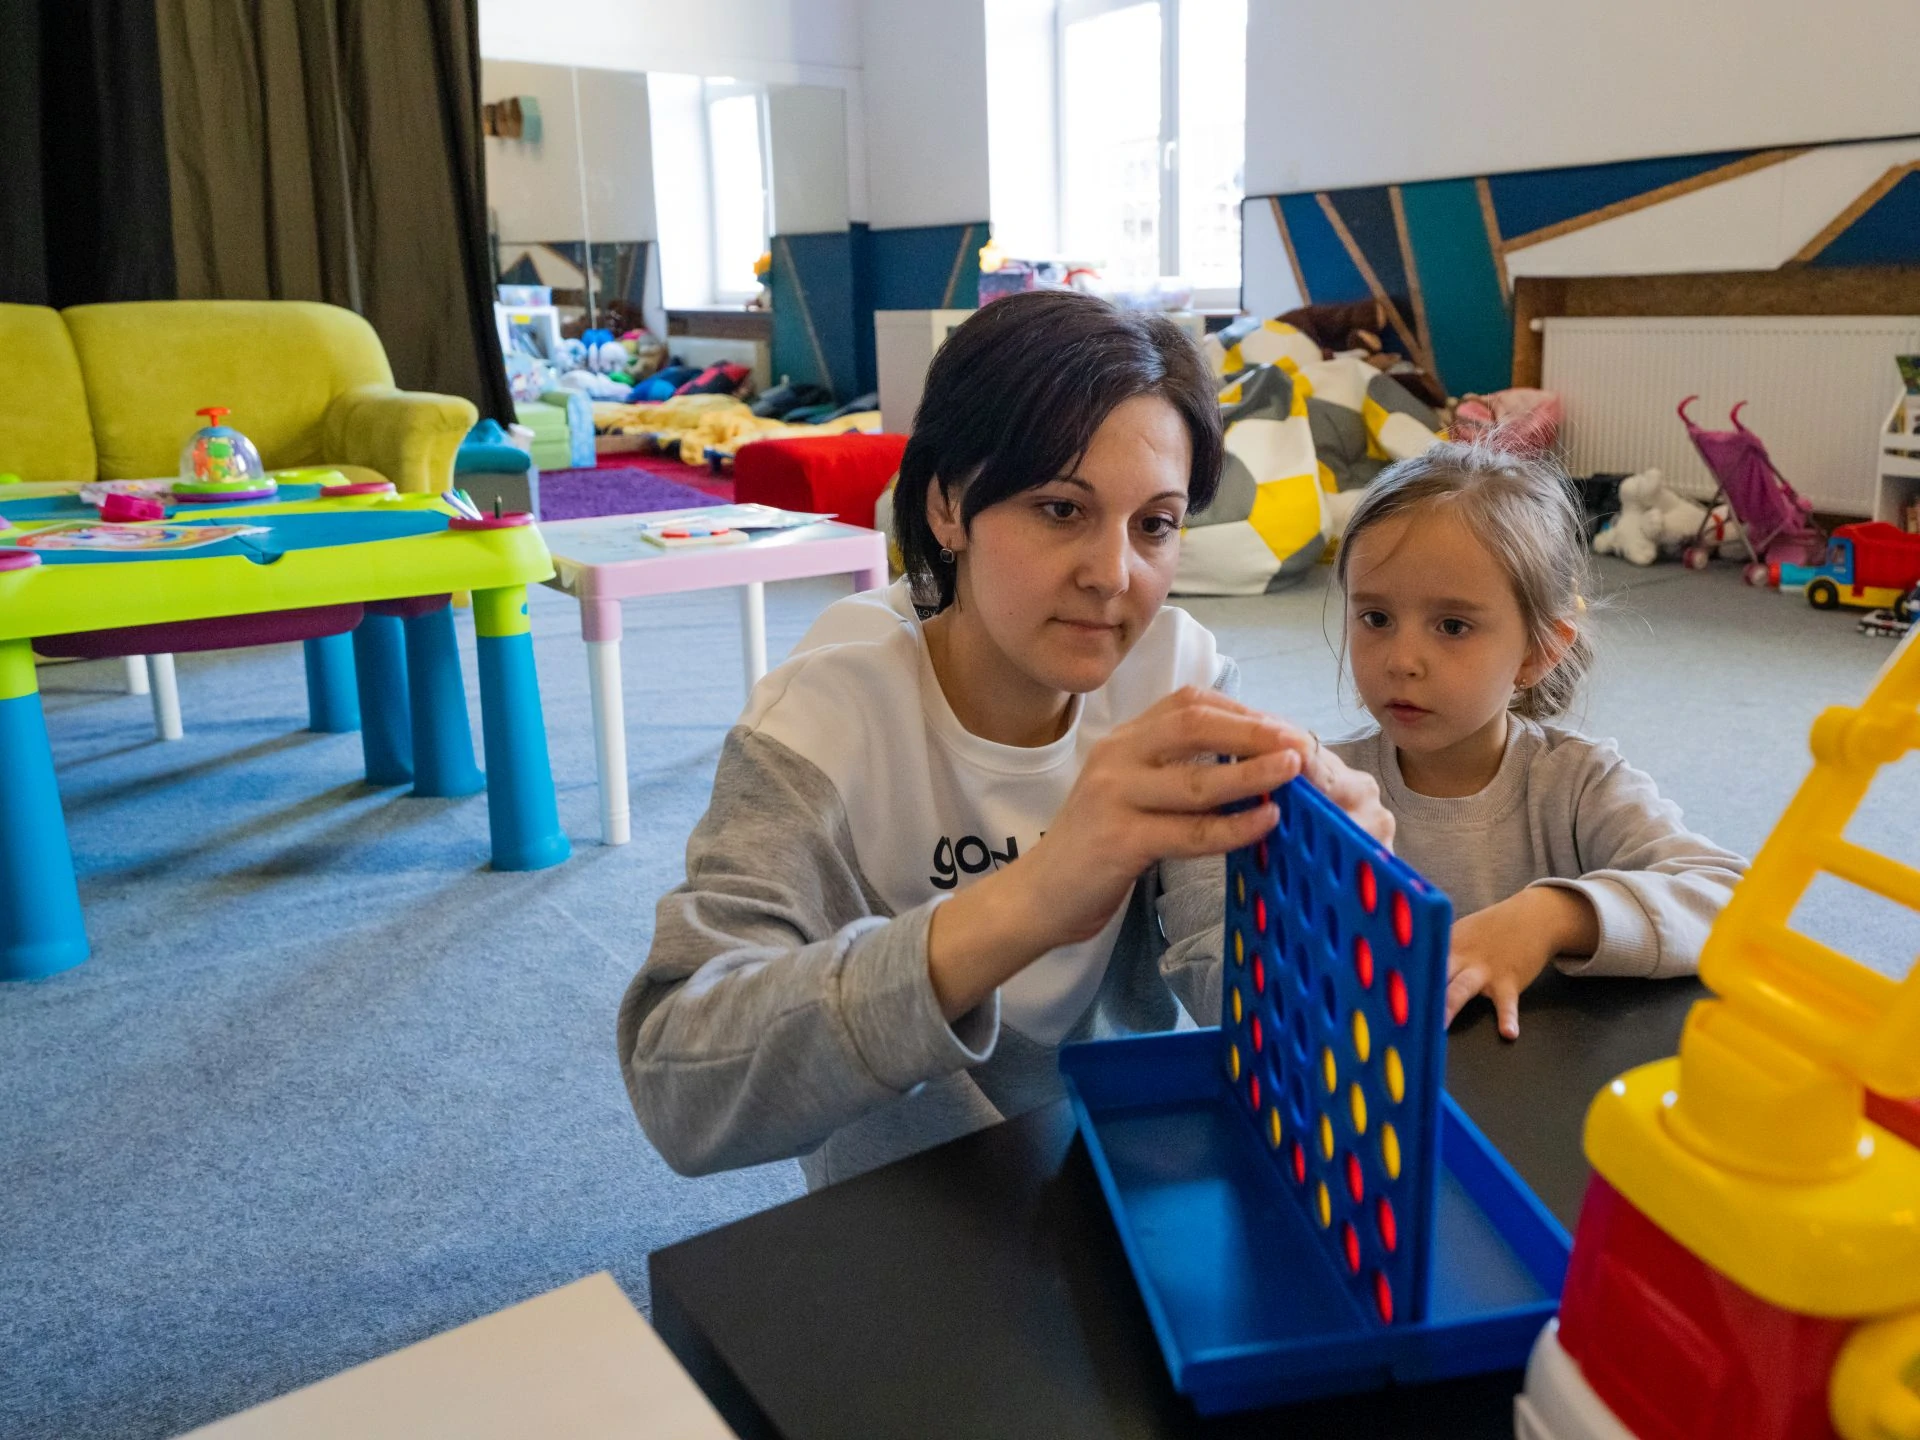 A mother plays a colorful game with her daughter in the JCC safe space in Krakow.